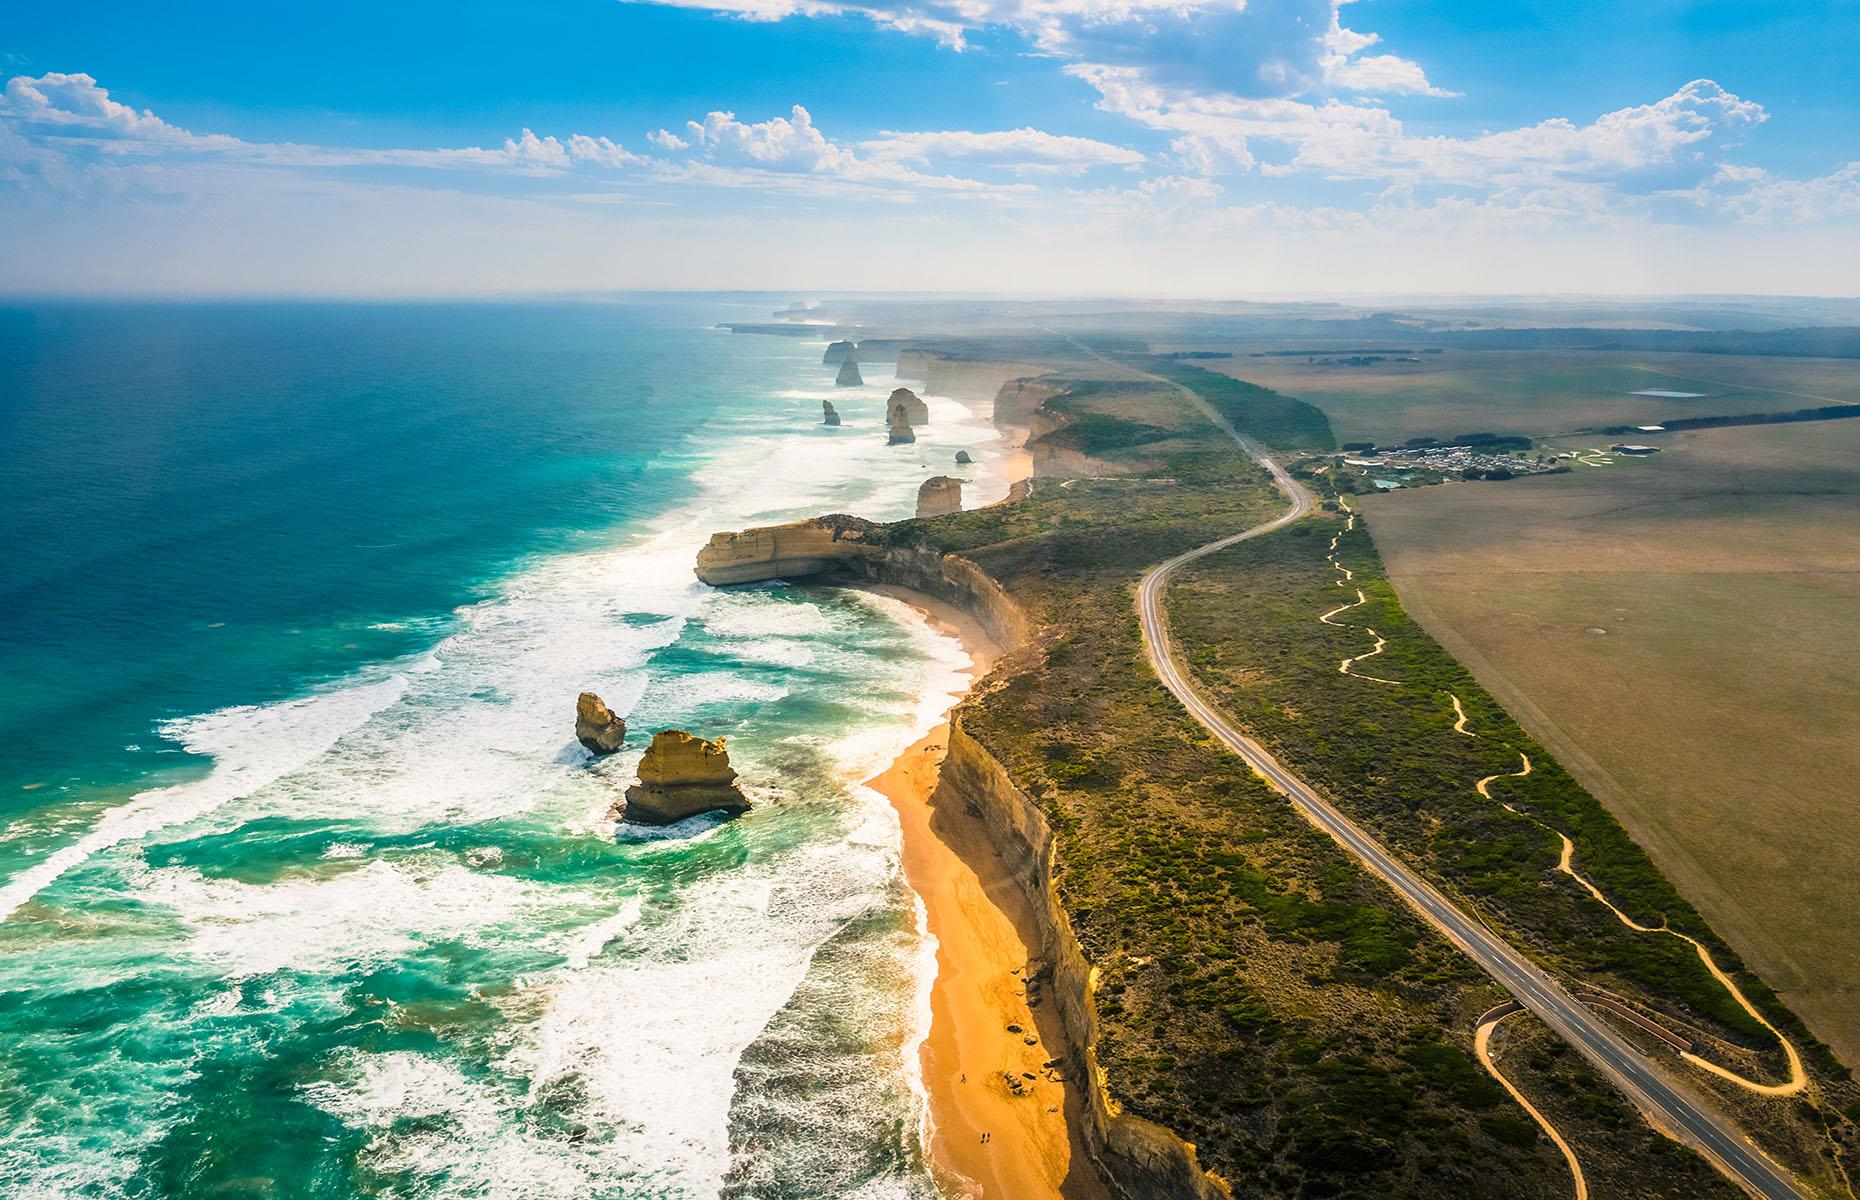 <p>Australia’s Great Ocean Road skirts along Victoria's coast to the border with South Australia, with jaw-dropping views at every stretch. Start in Torquay, Victoria to take the 148-mile (243km) route west that takes in golden arcs of secluded sand, verdant rainforest and plunging cliffs.</p>  <p>The coastline's most famous rock formations can be seen in <a href="http://www.visitvictoria.com/regions/Great-Ocean-Road/Things-to-do/Nature-and-wildlife/National-parks-and-reserves/Port-Campbell-National-Park.aspx">Port Campbell National Park</a>, towards the end of the route, including the Twelve Apostles. Although sadly erosion has seen to it that only eight of these magnificent rocks remain.</p>